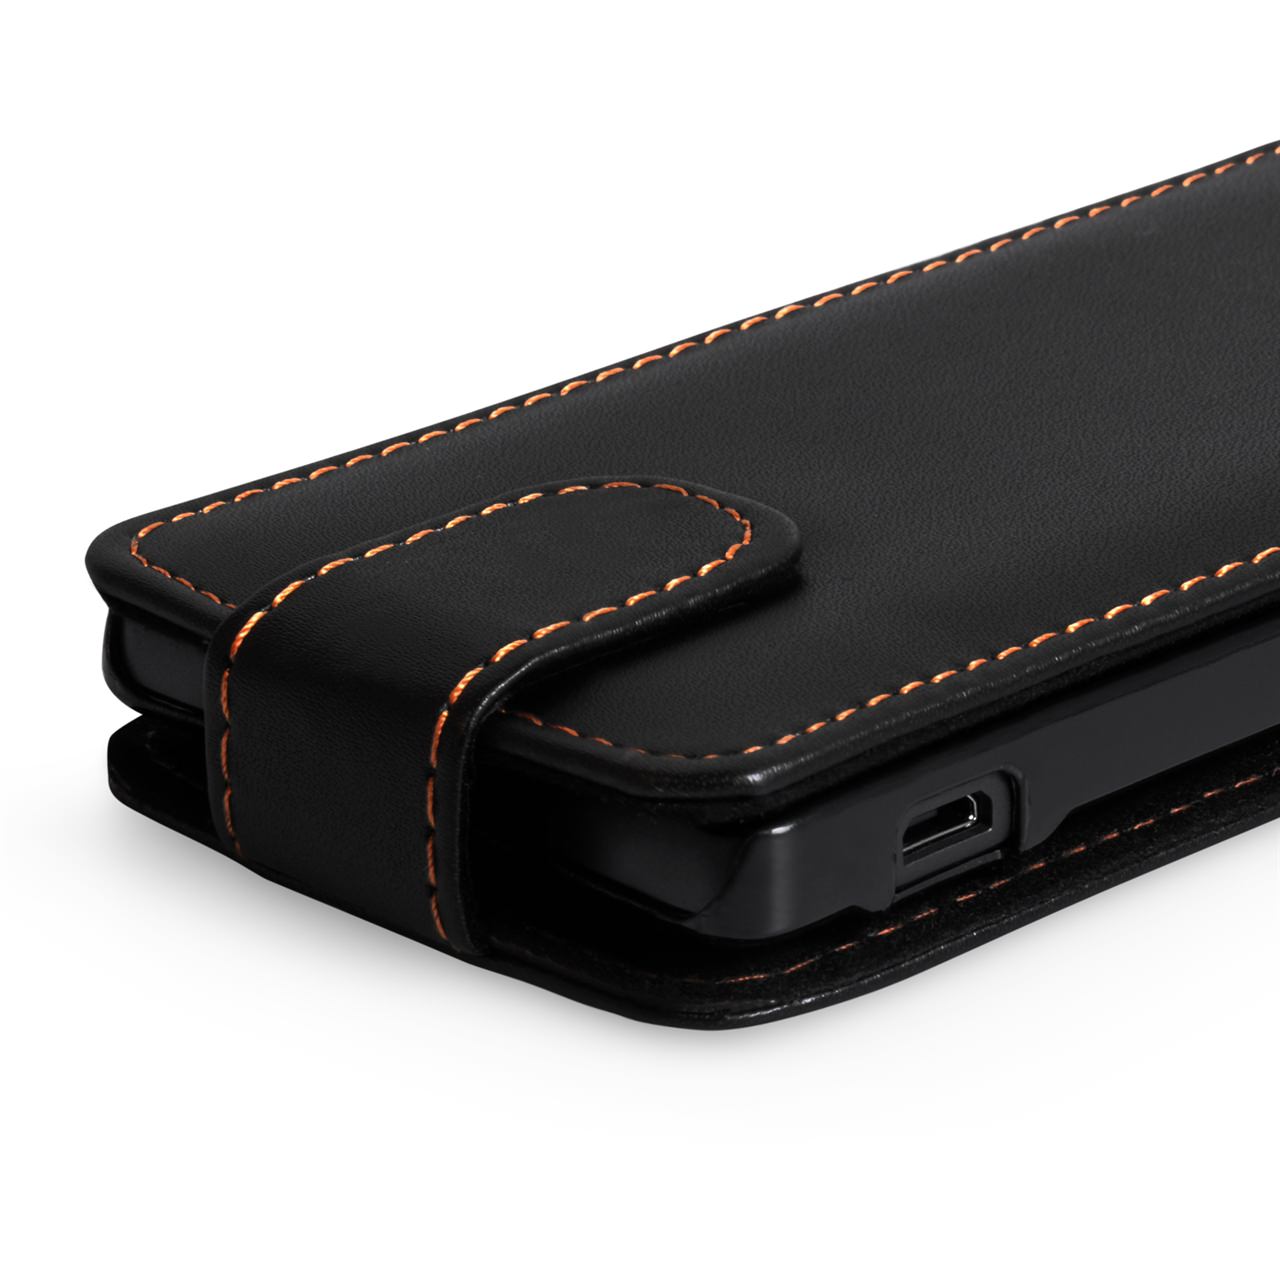 YouSave Accessories Sony Xperia SP Leather-Effect Flip Case - Black